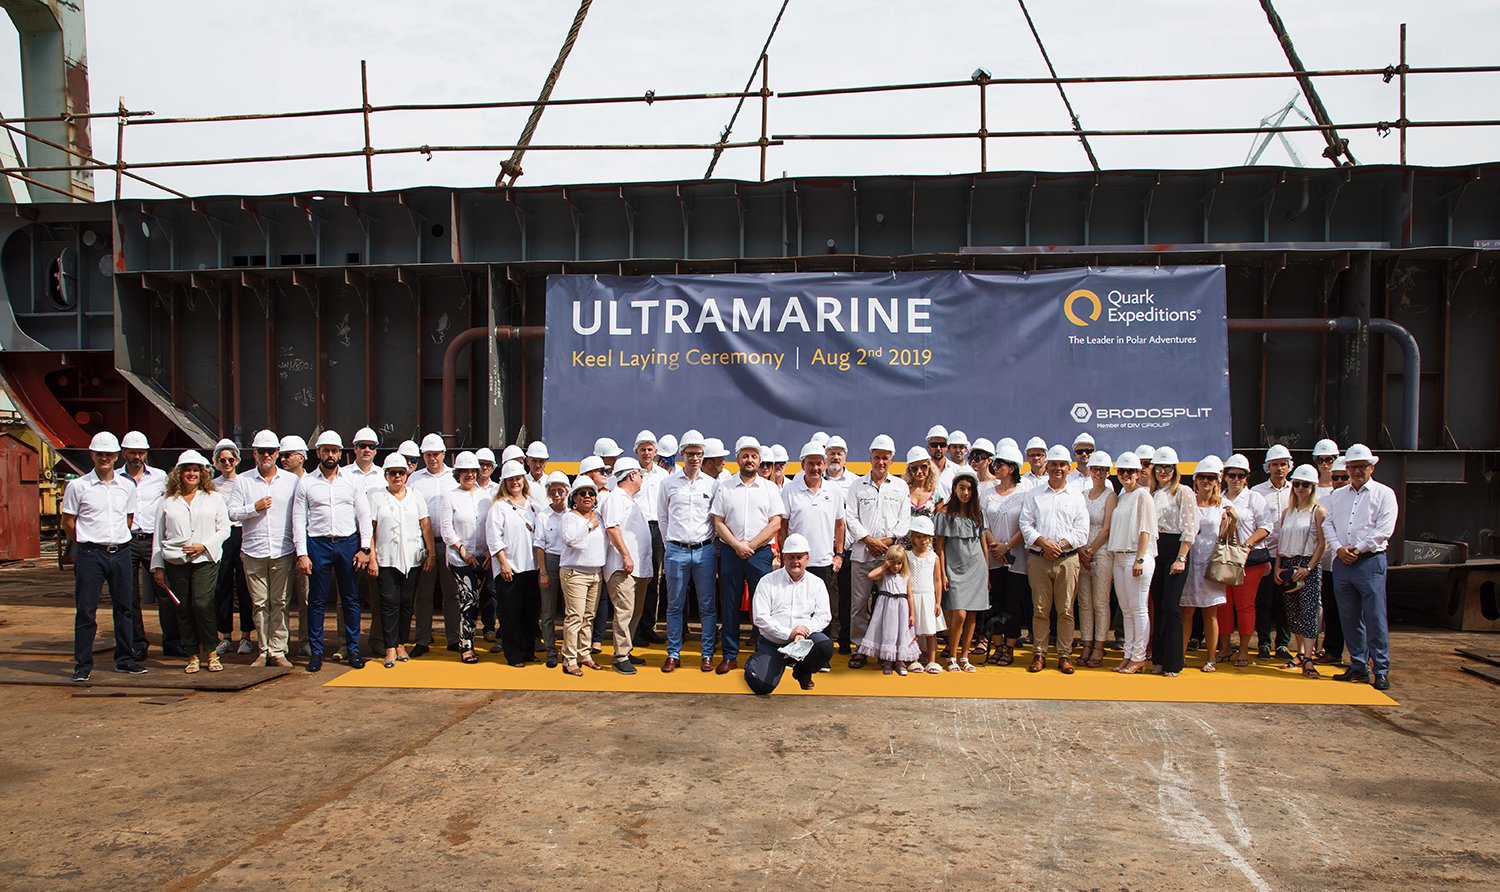 A group photo of all guests invited for the keel laying ceremony